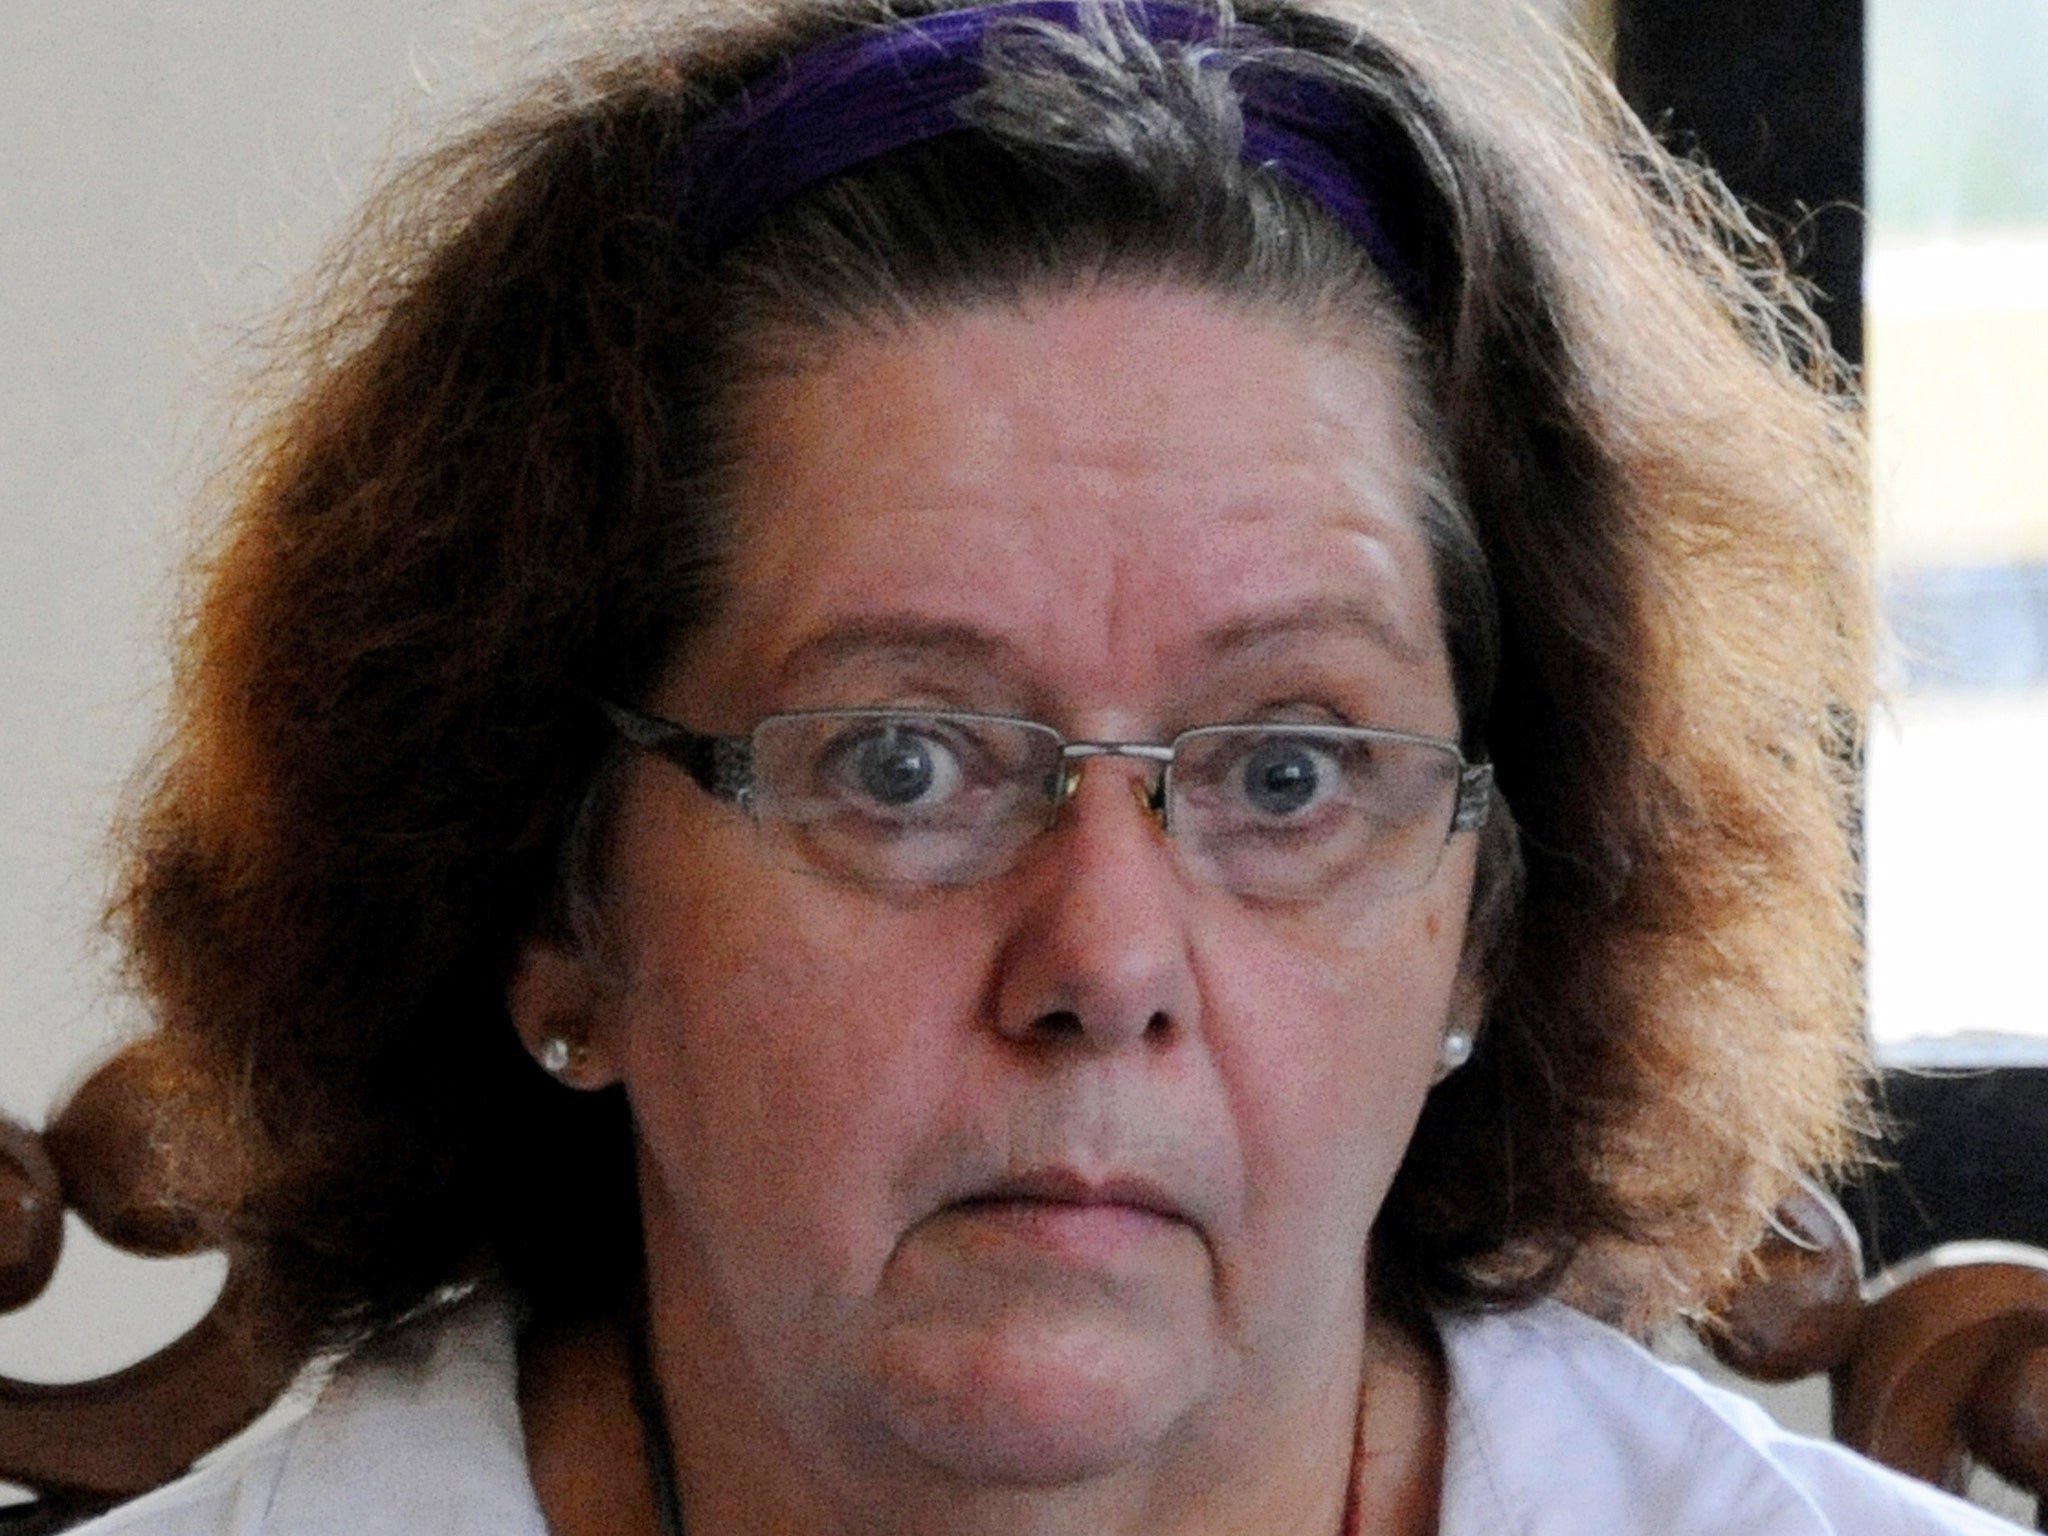 Sandiford was caught in possession of drugs worth an estimated £1.6m in May 2012